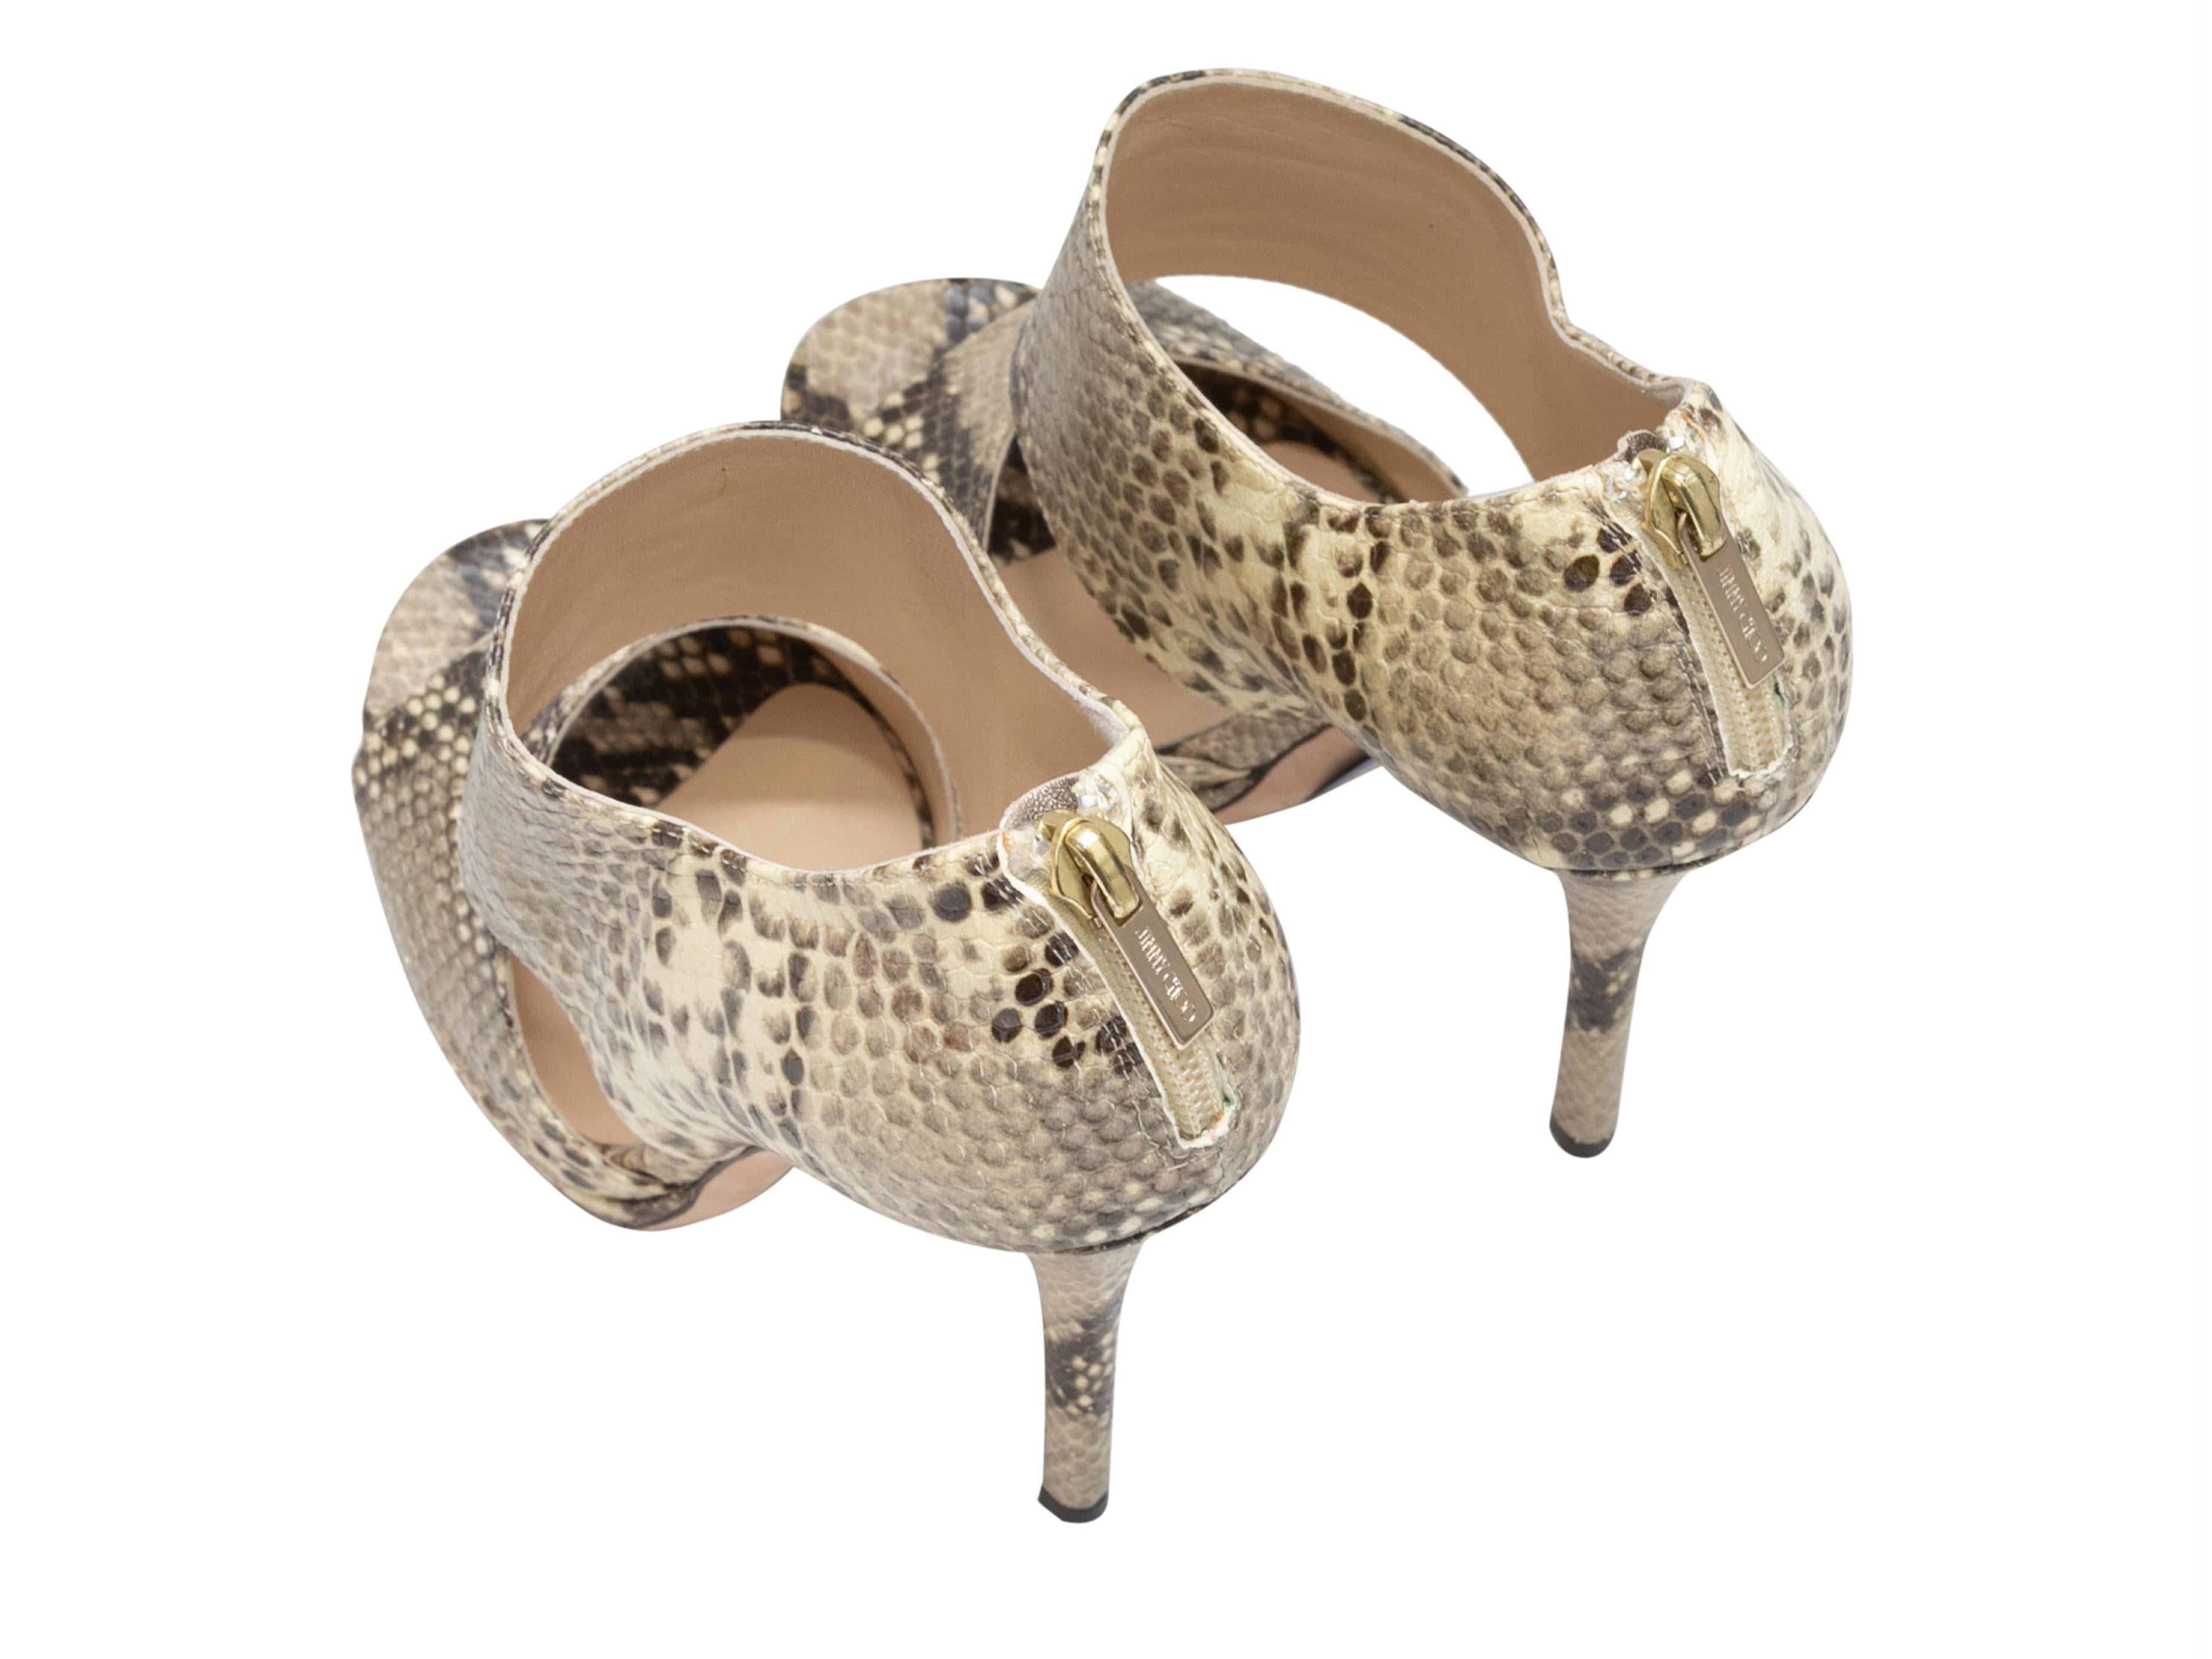 Beige & Grey Jimmy Choo Snakeskin Heeled Sandals Size 38 In Good Condition For Sale In New York, NY